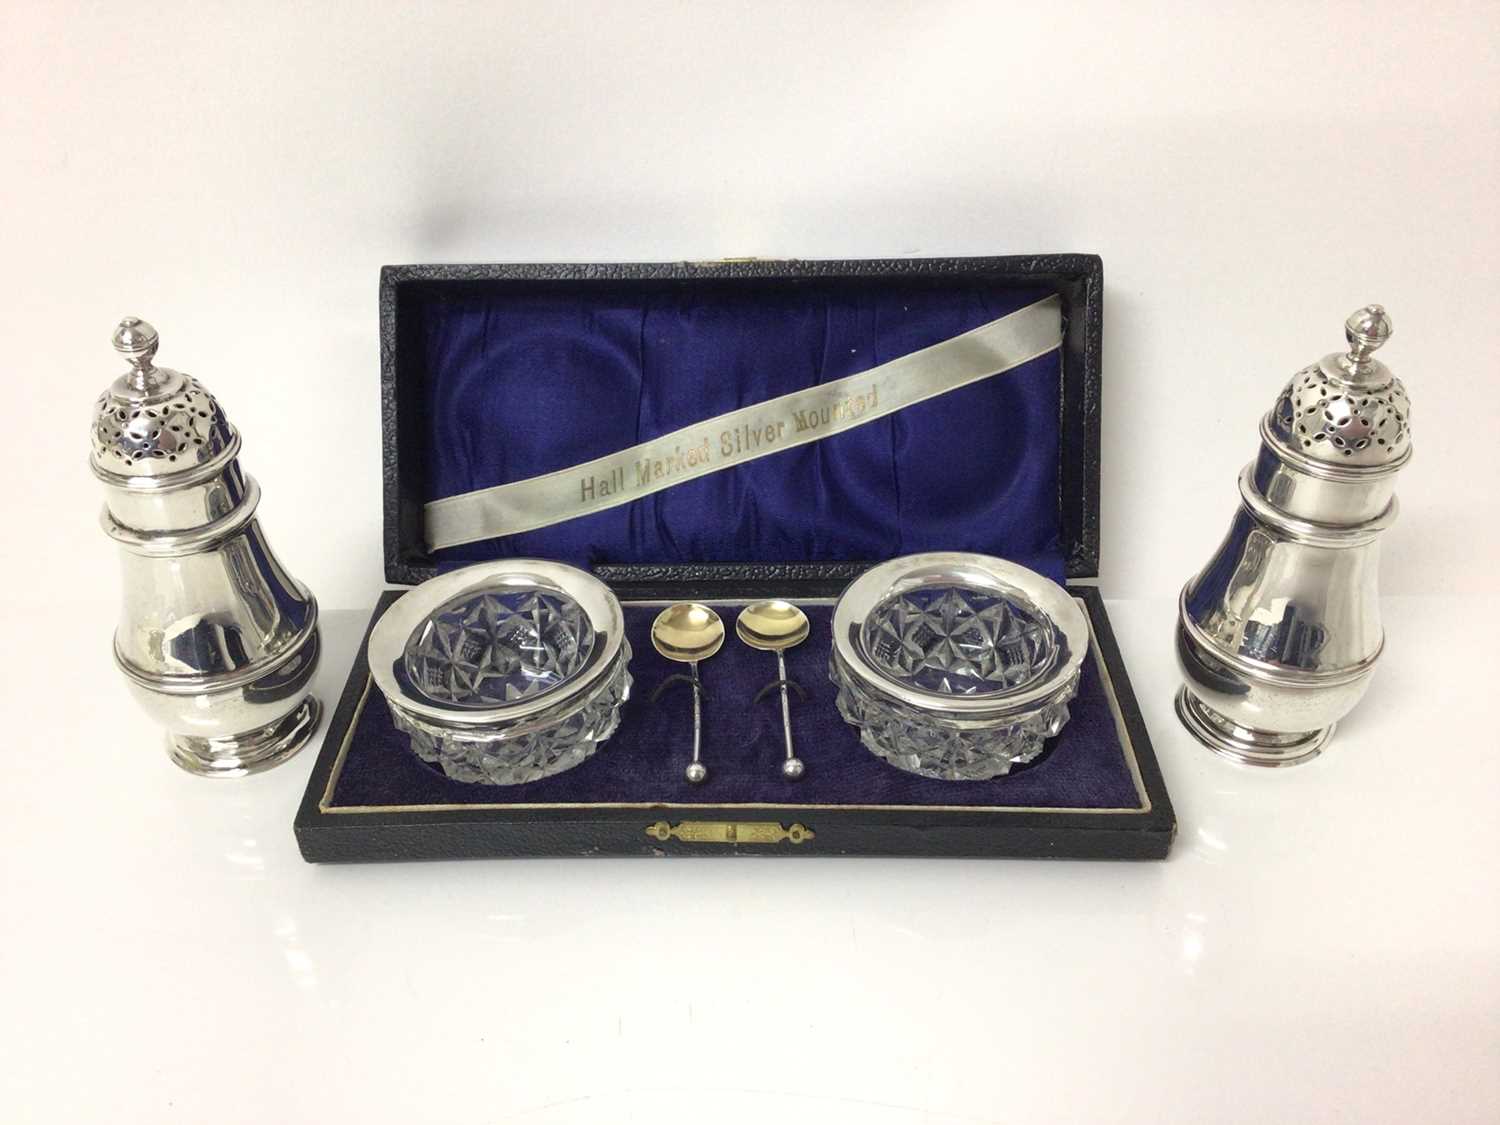 Lot 124 - George V silver salt and pepper, of baluster form, with reeded decoration and pierced tops, hallmarked for London 1915, together with a pair of cased silver-mounted cut glass salts with silver spoo...